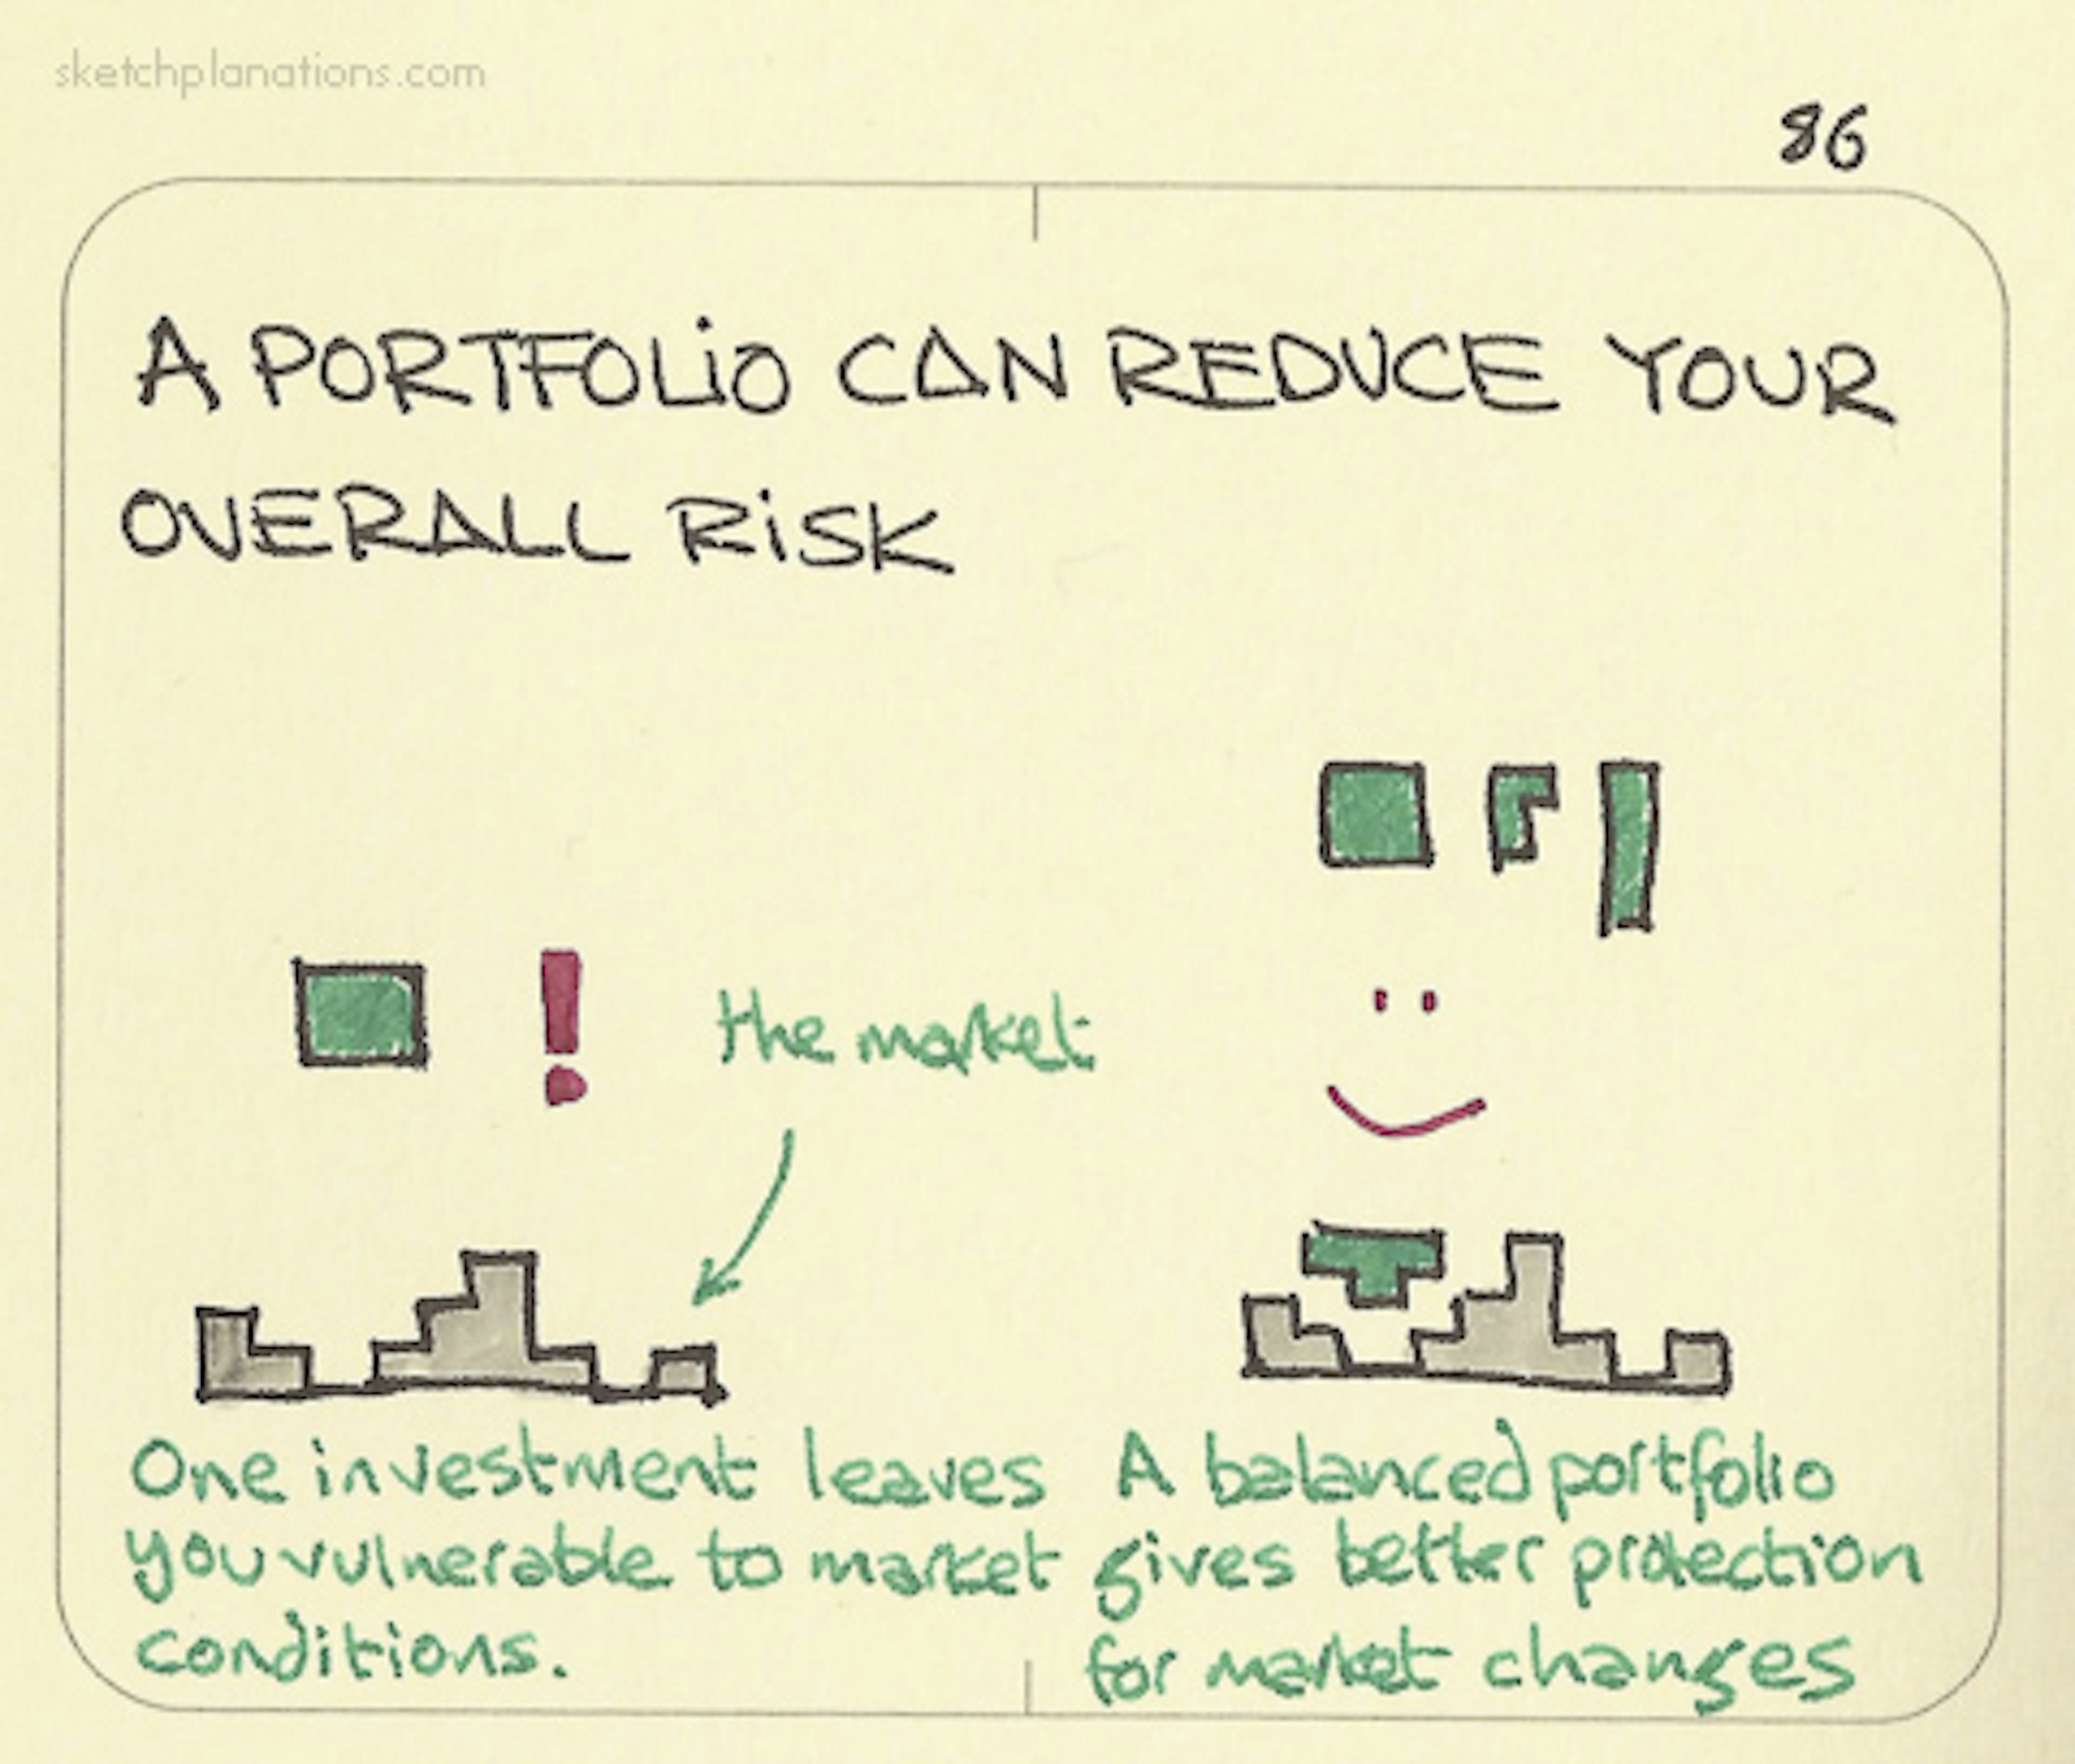 A portfolio can reduce your overall risk - Sketchplanations